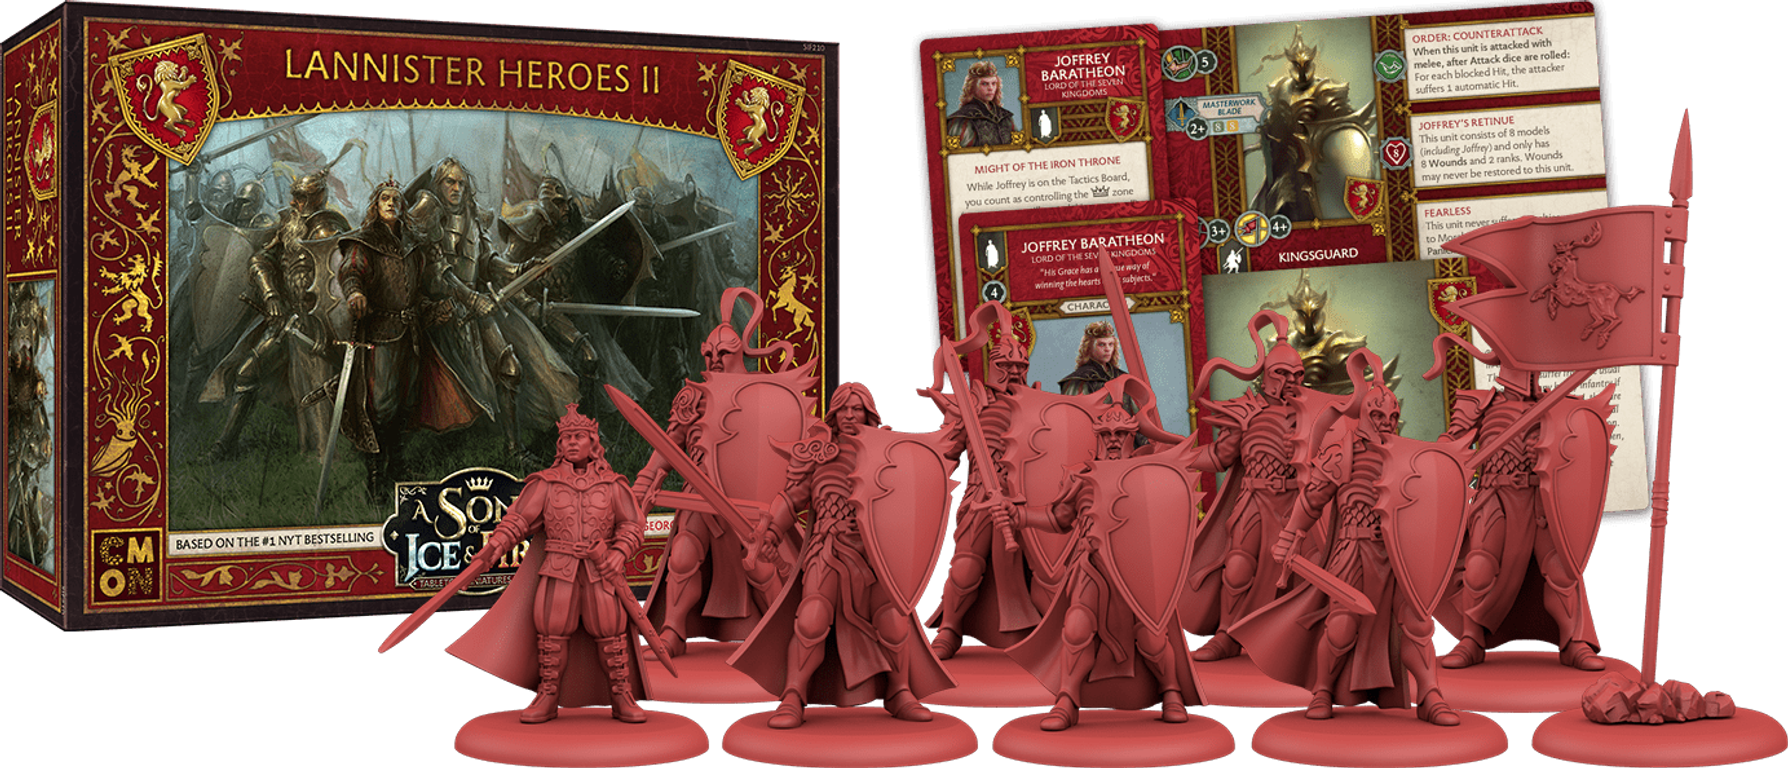 A Song of Ice & Fire: Tabletop Miniatures Game – Lannister Heroes II komponenten